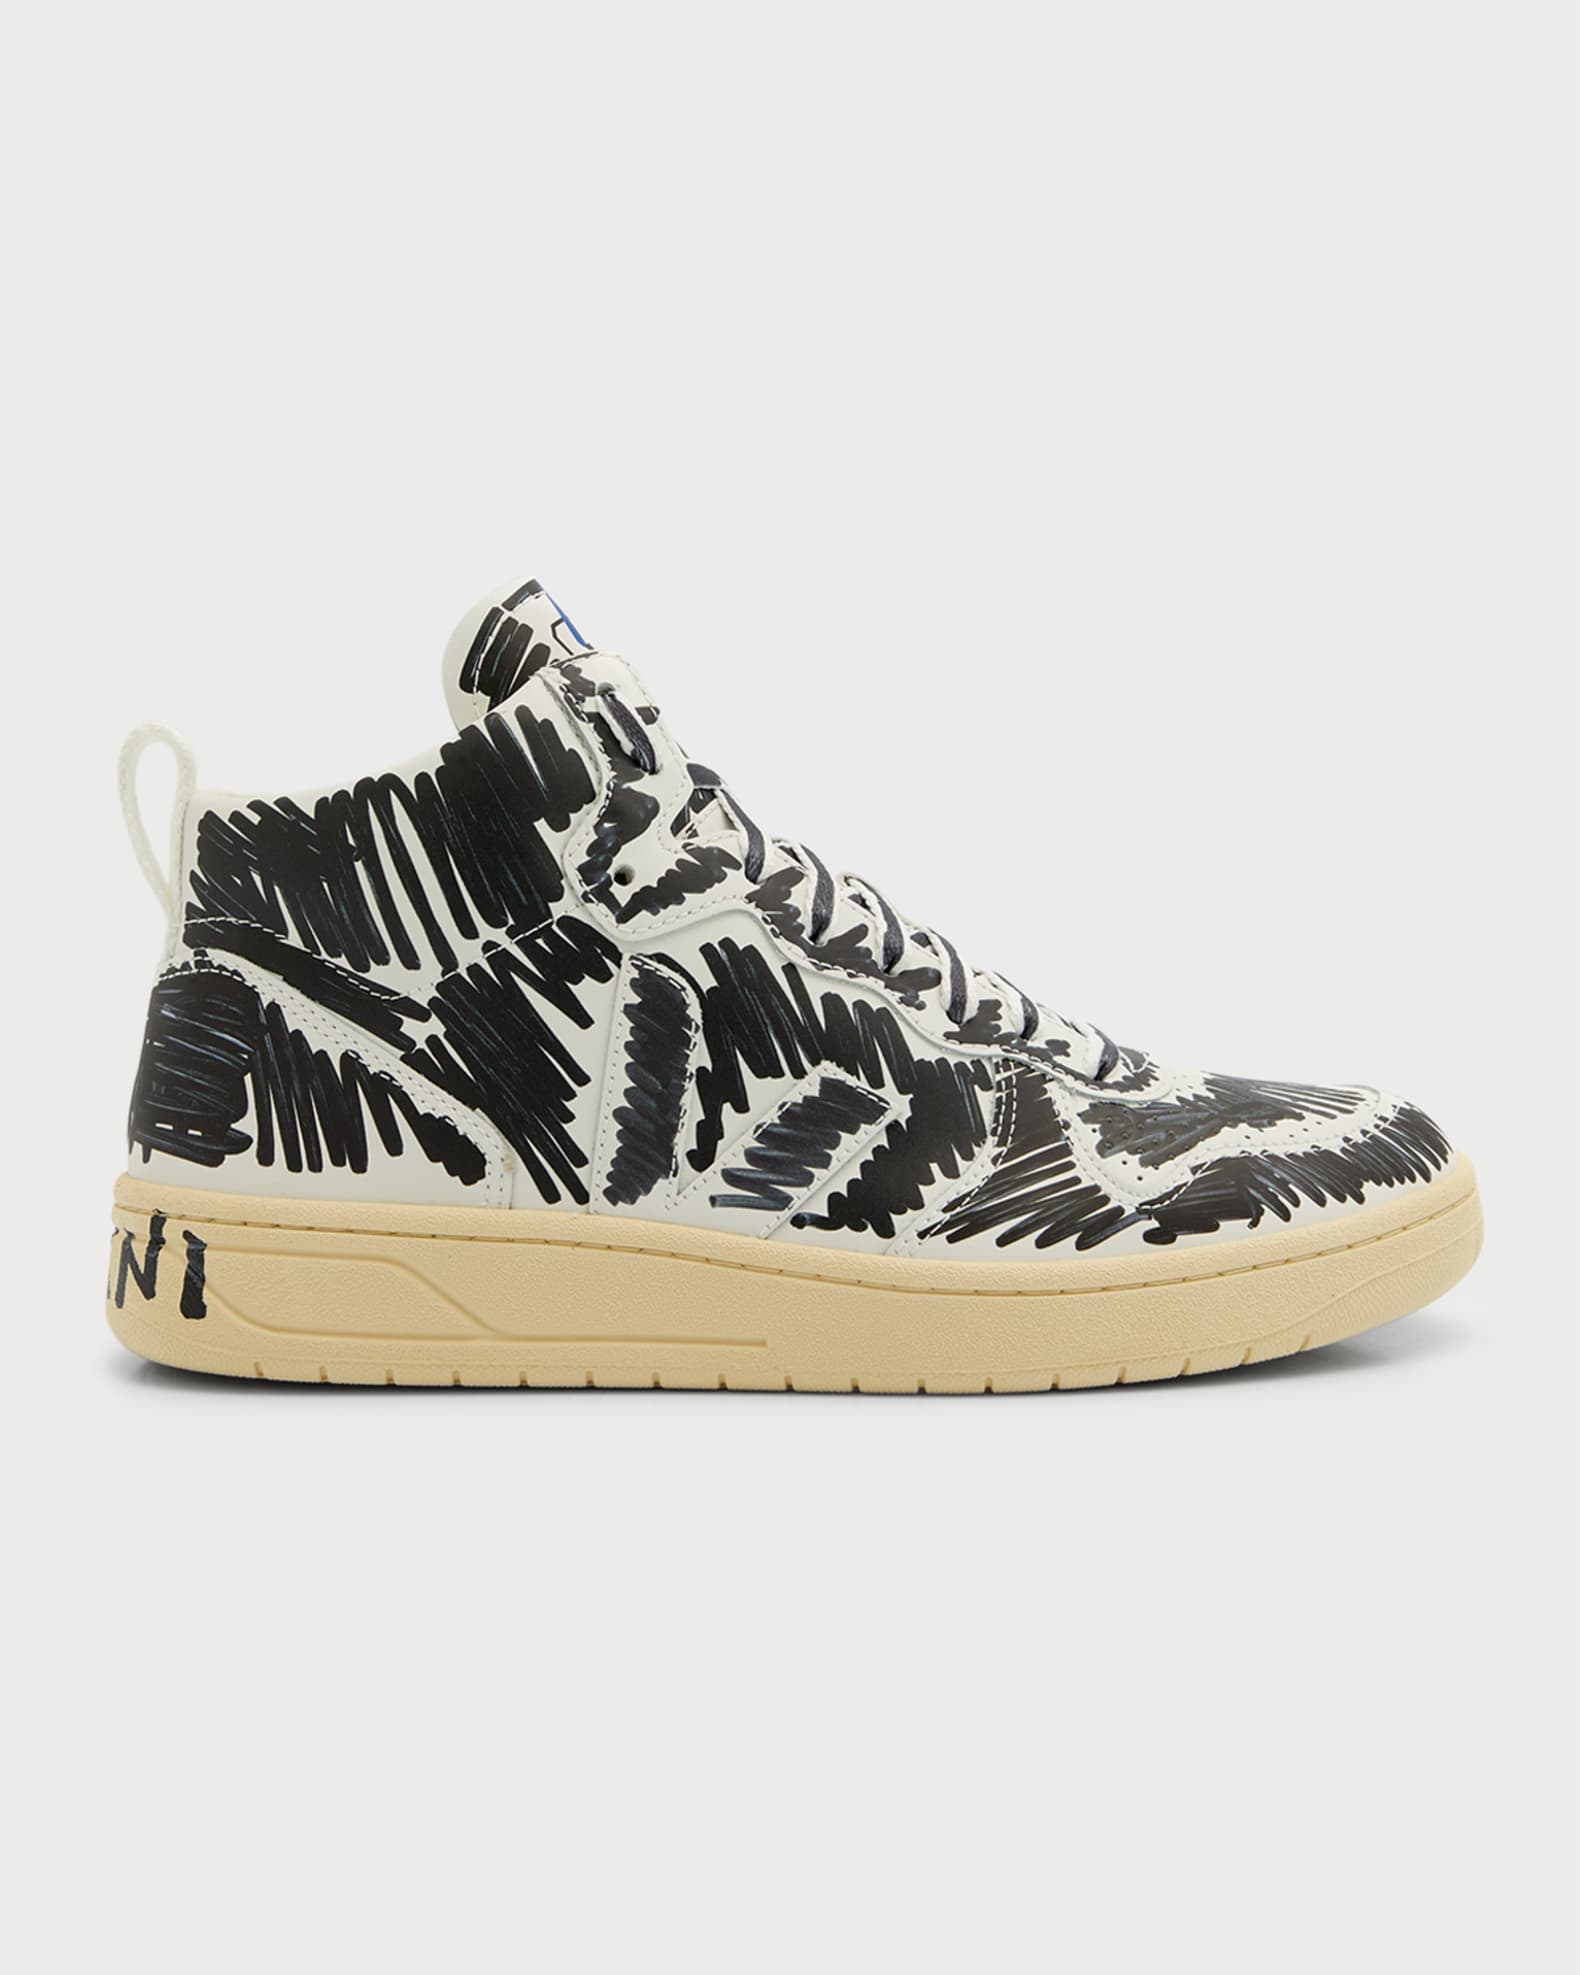 Marni x Veja Men's V15 Scribble Leather High-Top Sneakers | Neiman Marcus